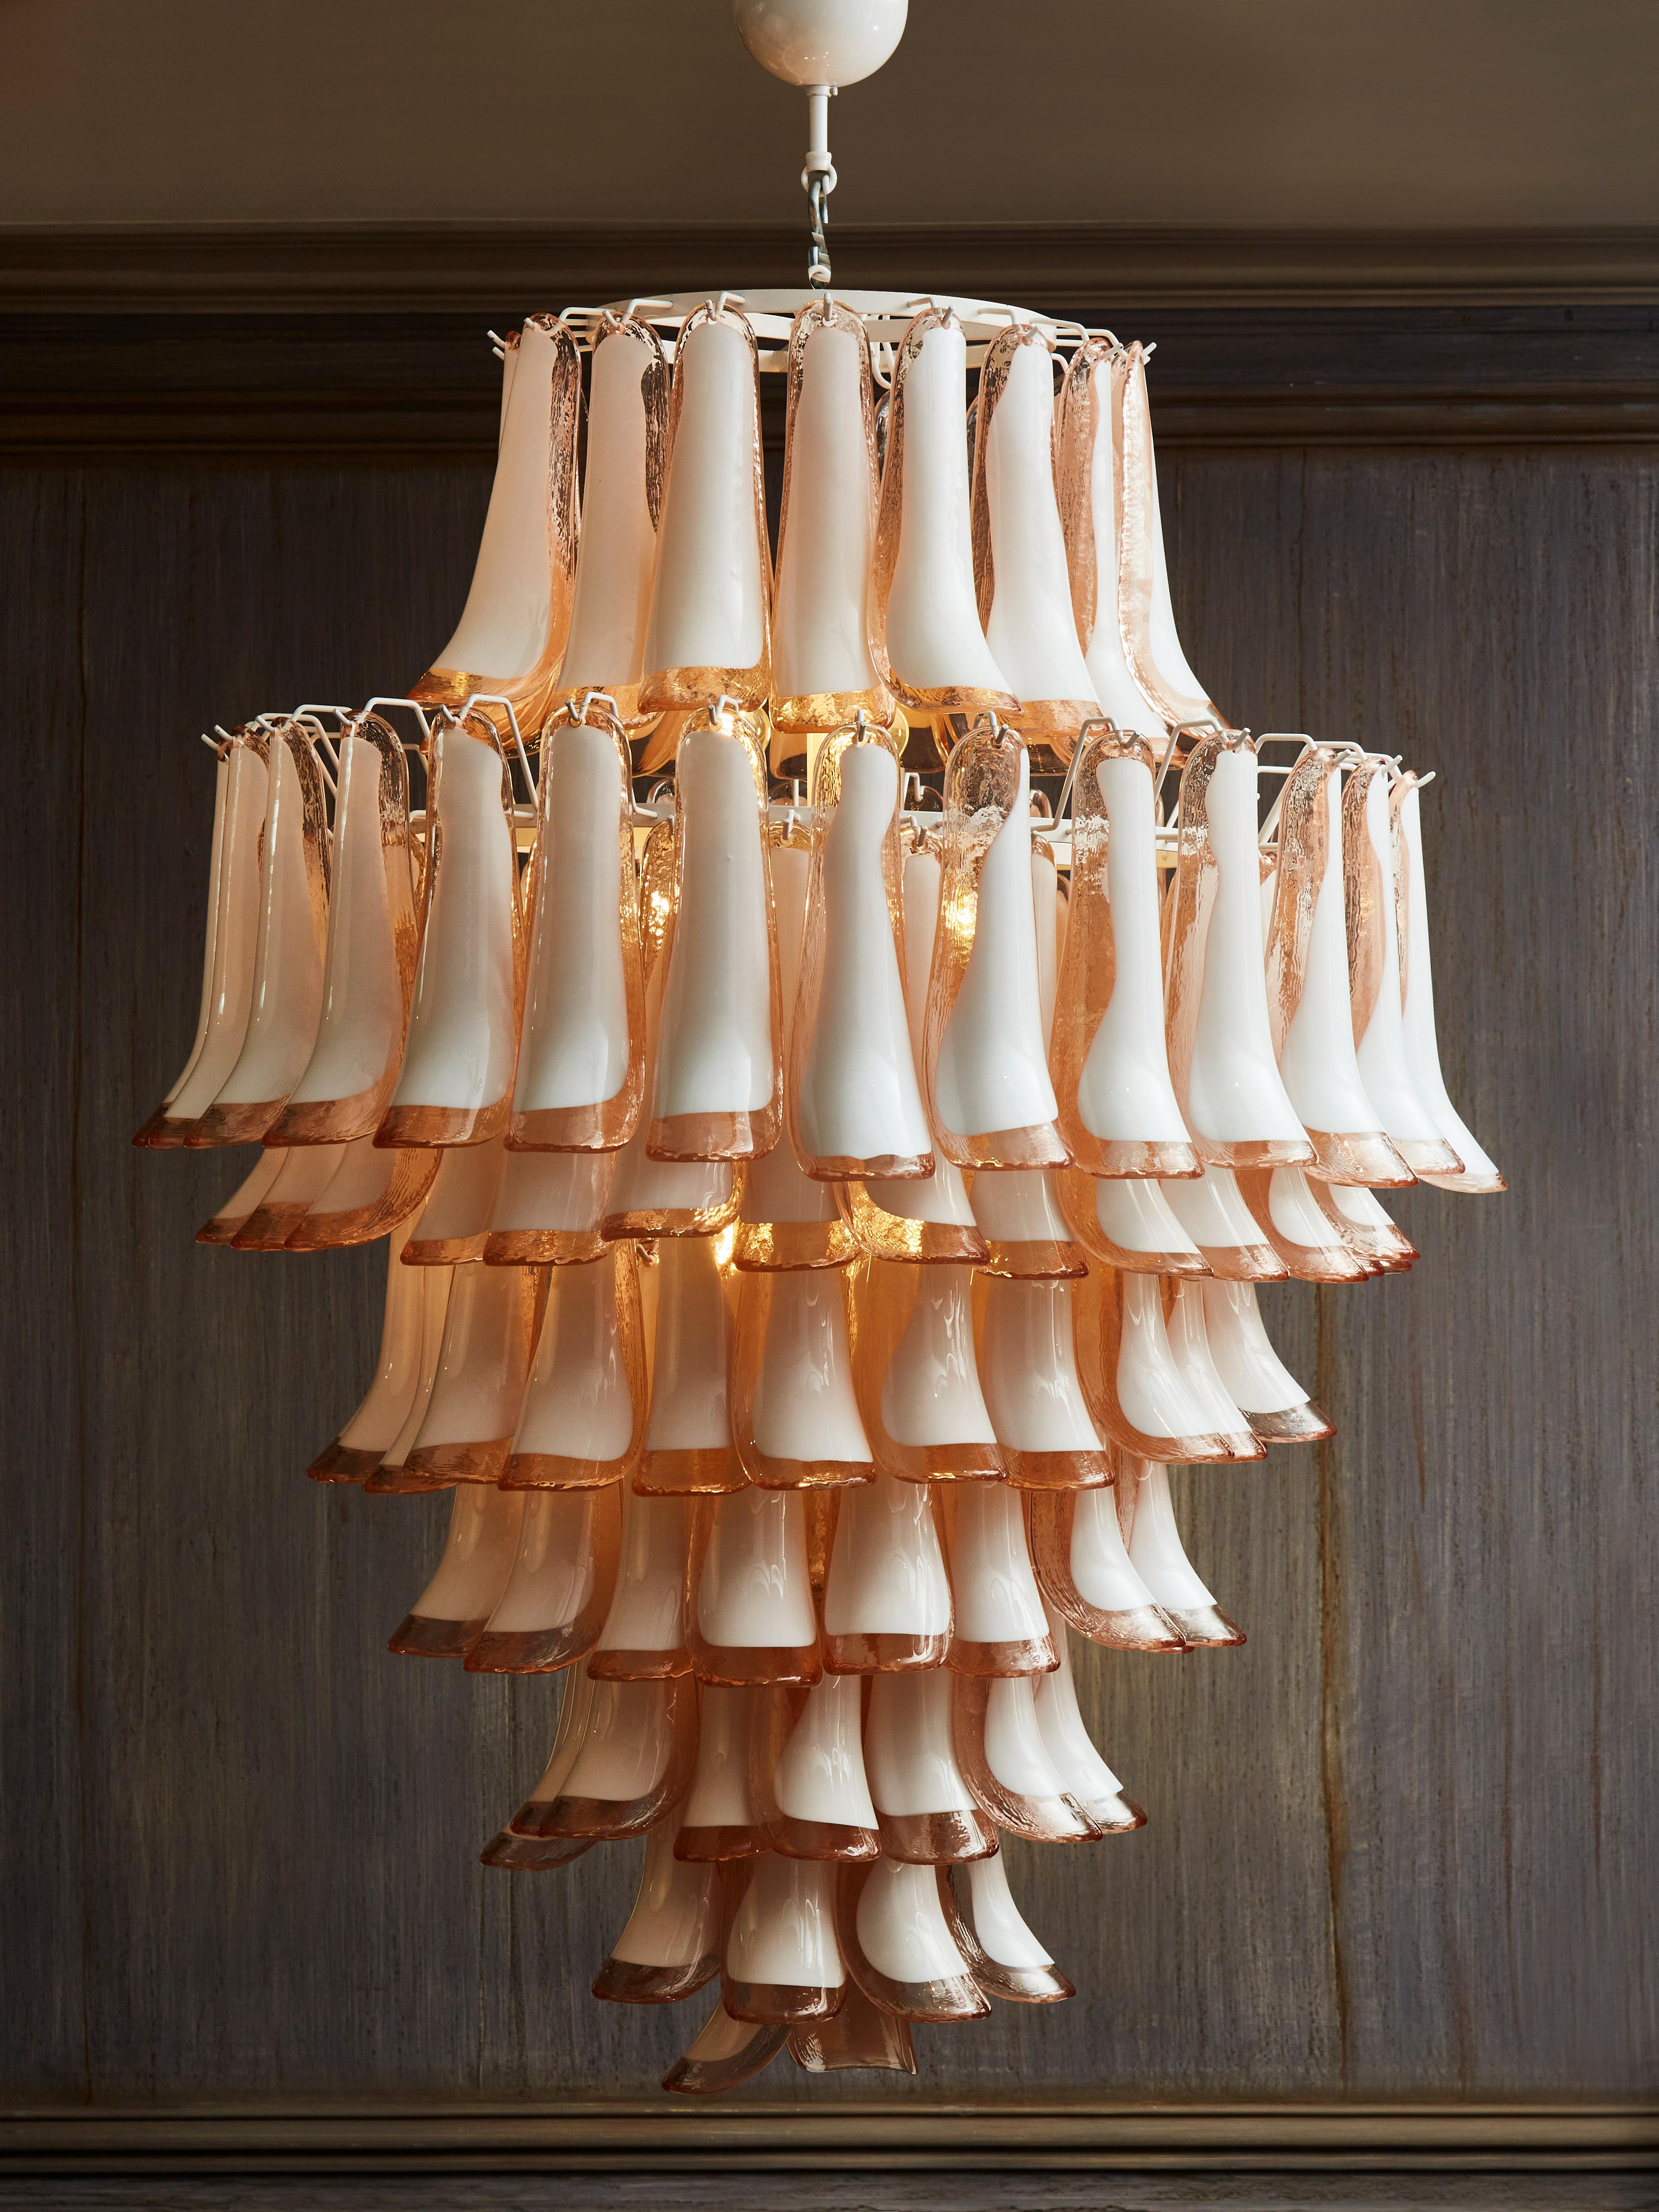 Exceptional chandelier in pink and white Murano glasses.
The structure has been made for the glasses which are vintage, from the 1970s.
Italy.